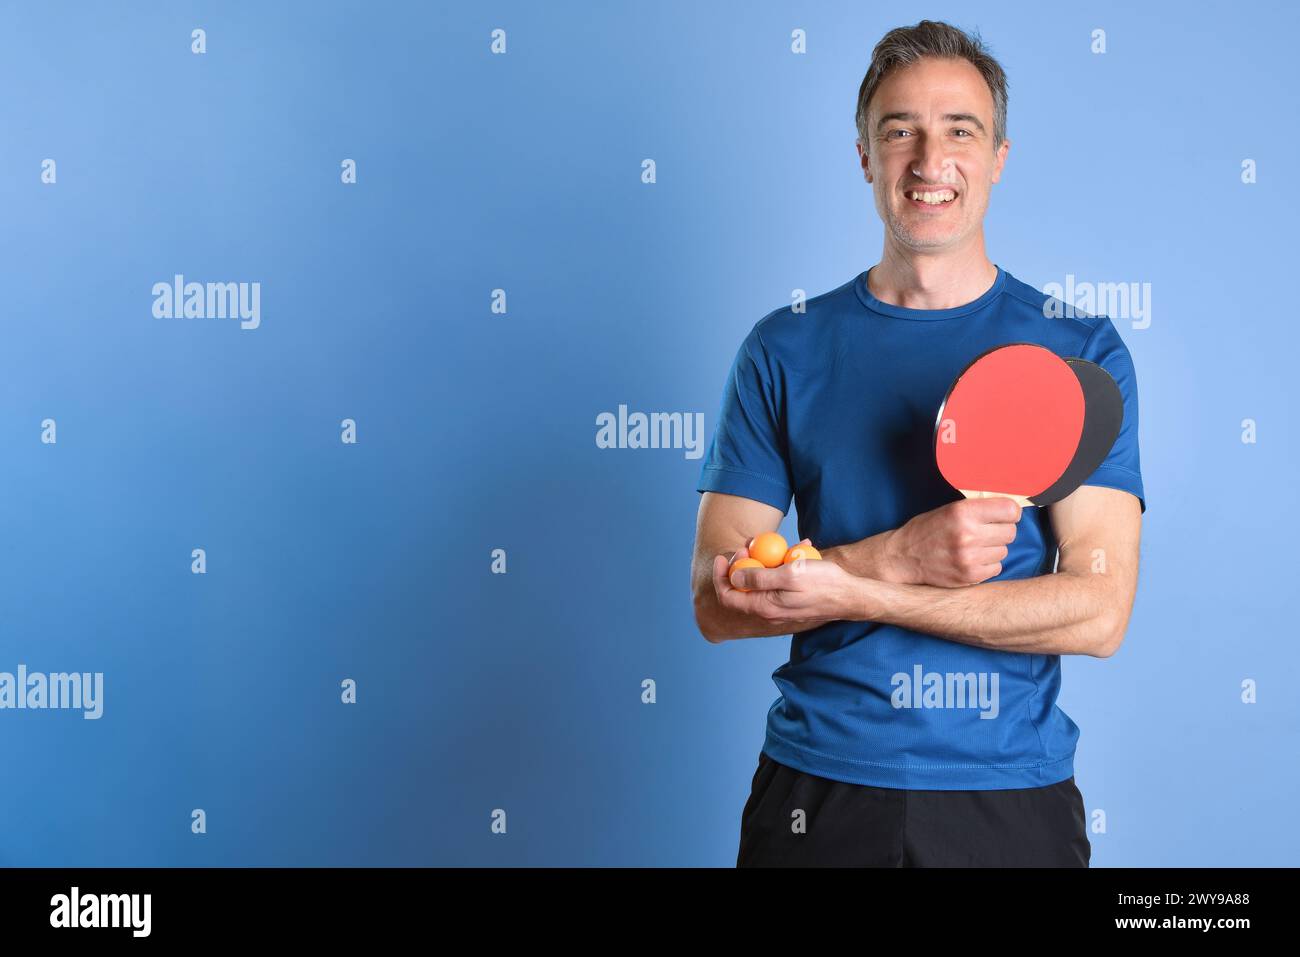 Smiling man in sportswear showing ping pong paddles and balls in hands on blue isolated background. Stock Photo